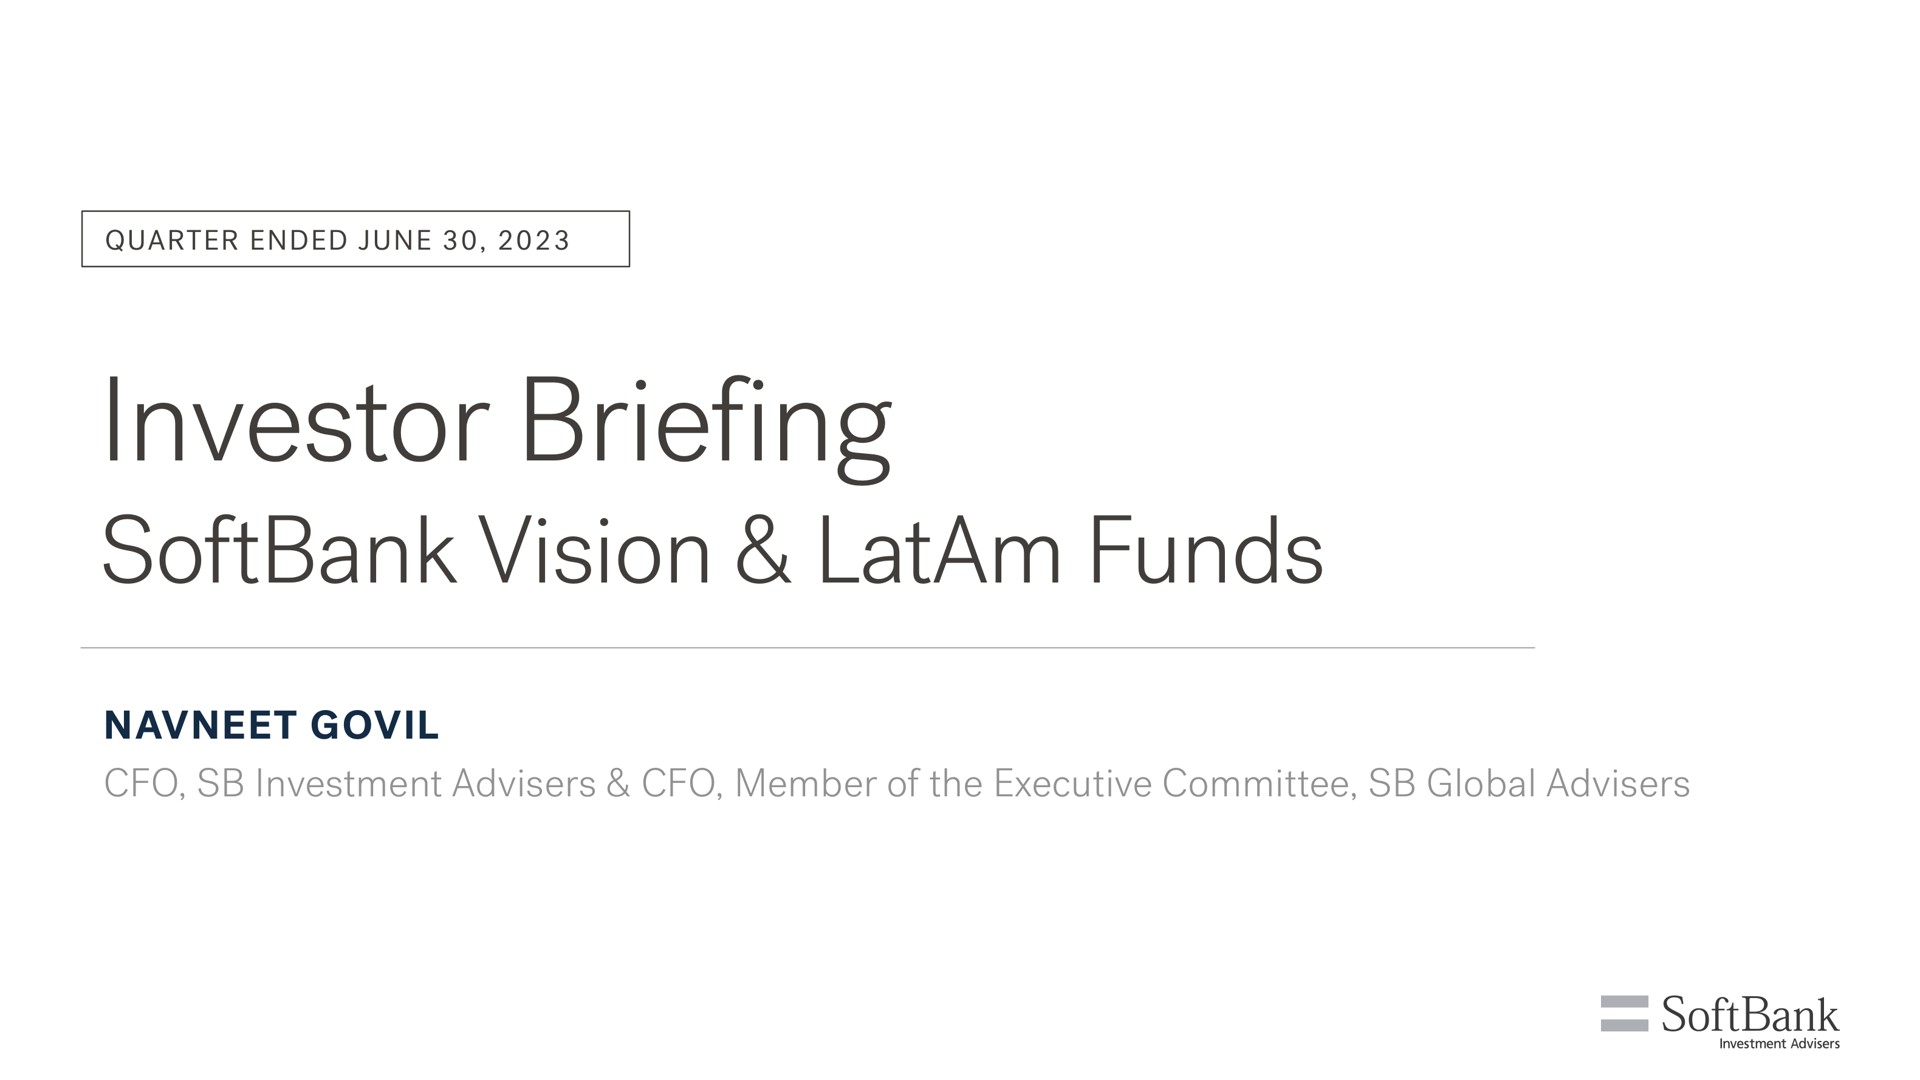 investor briefing vision funds investment advisers member of the executive committee global advisers | SoftBank